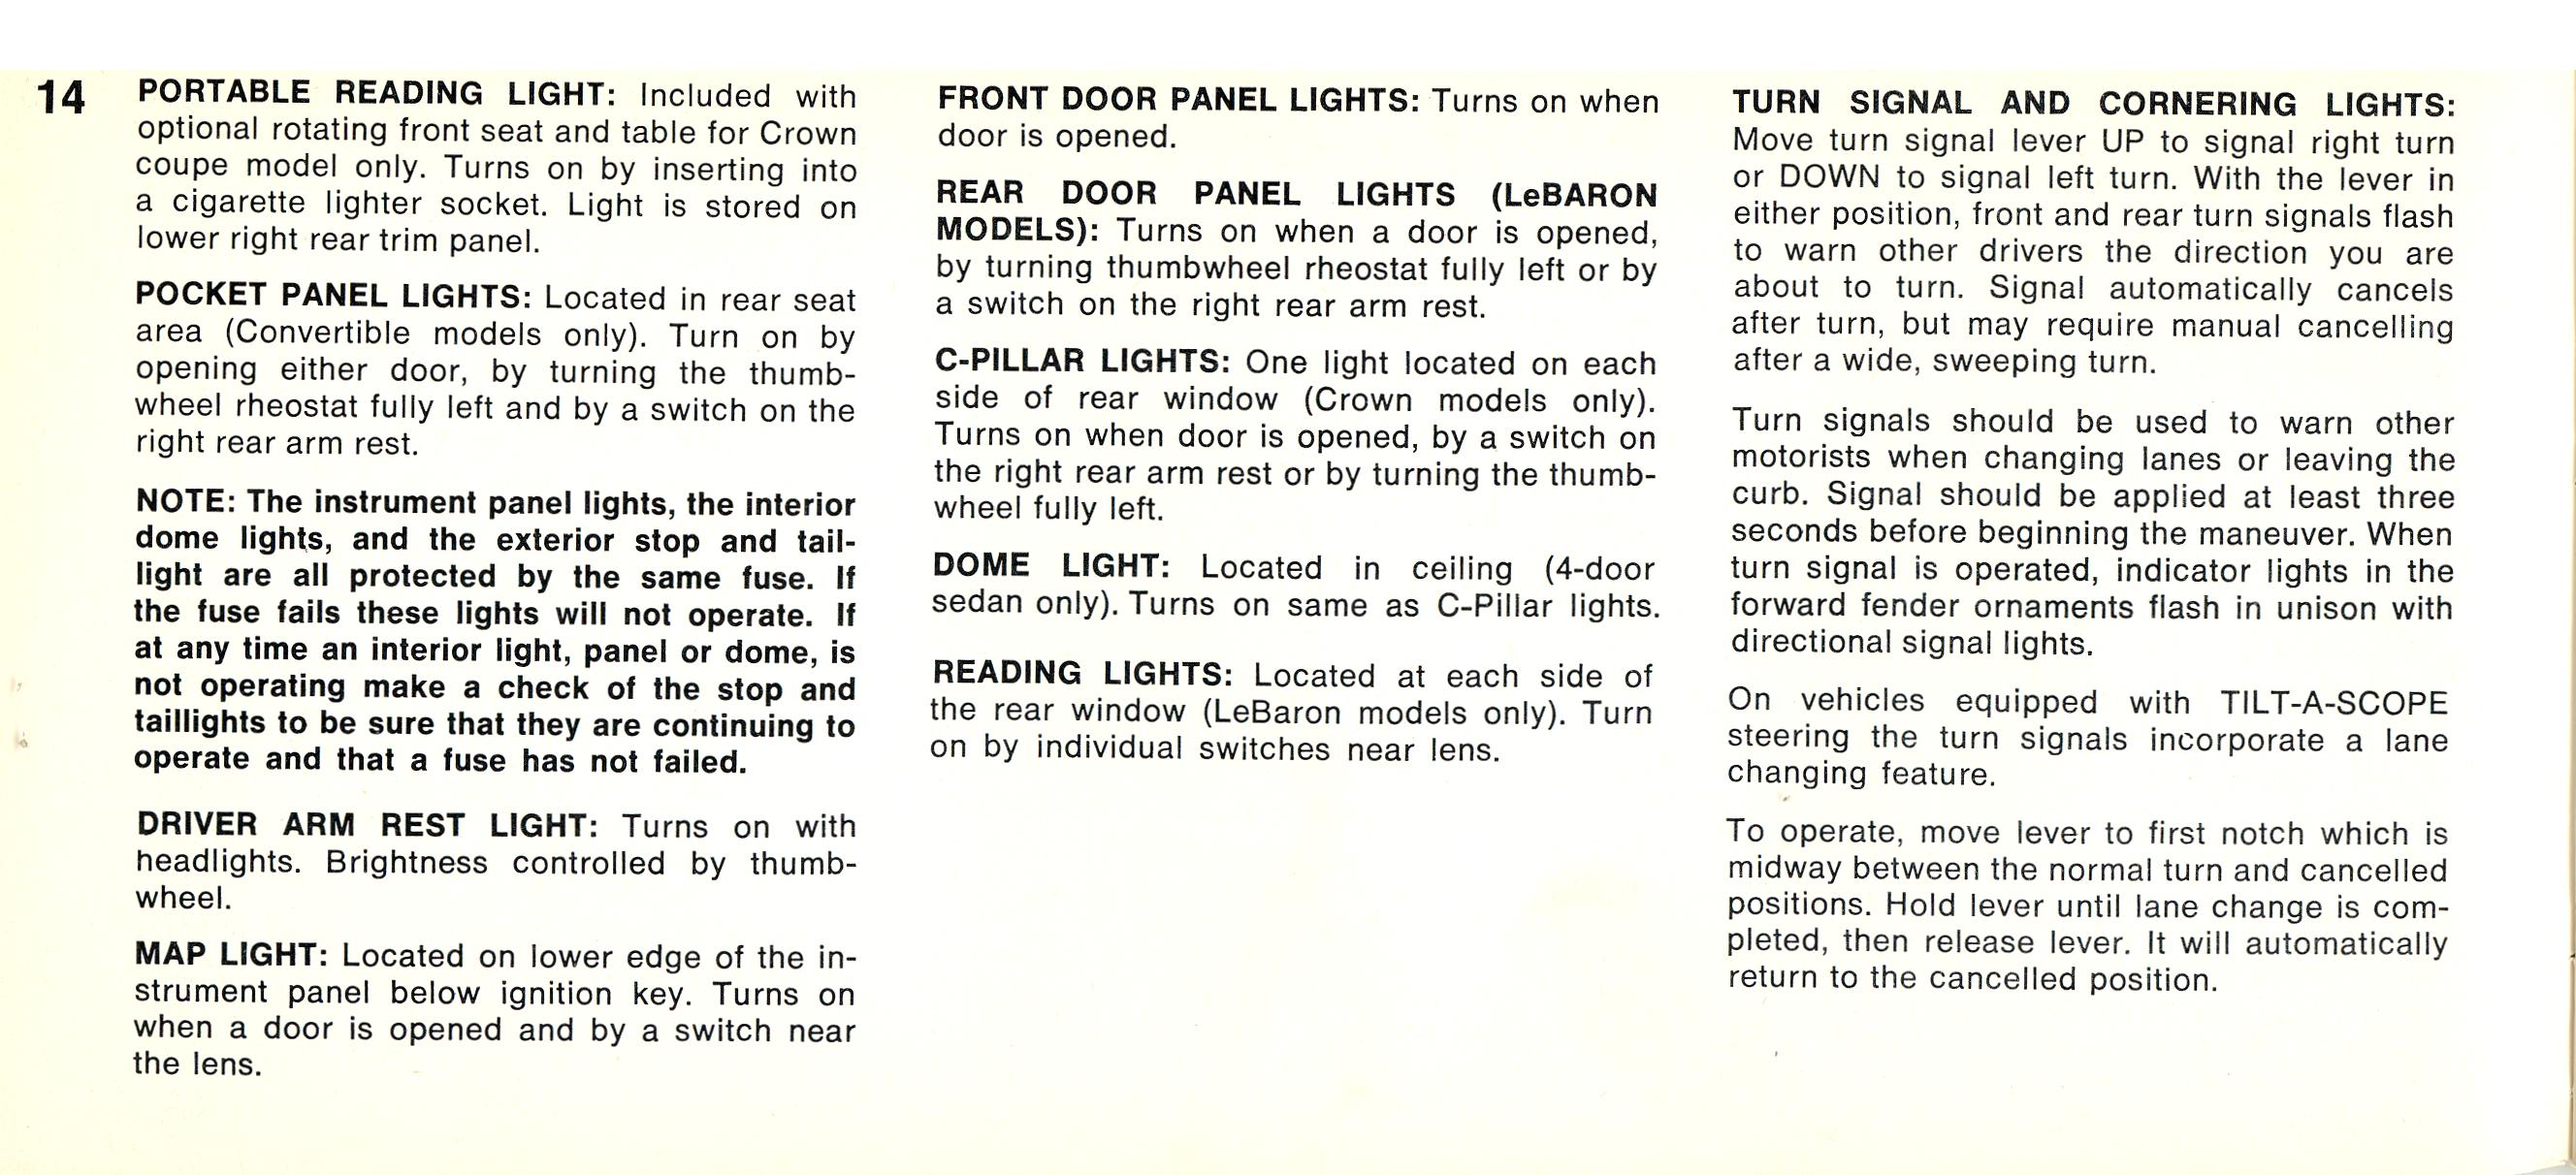 1968 Chrysler Imperial Owners Manual Page 44